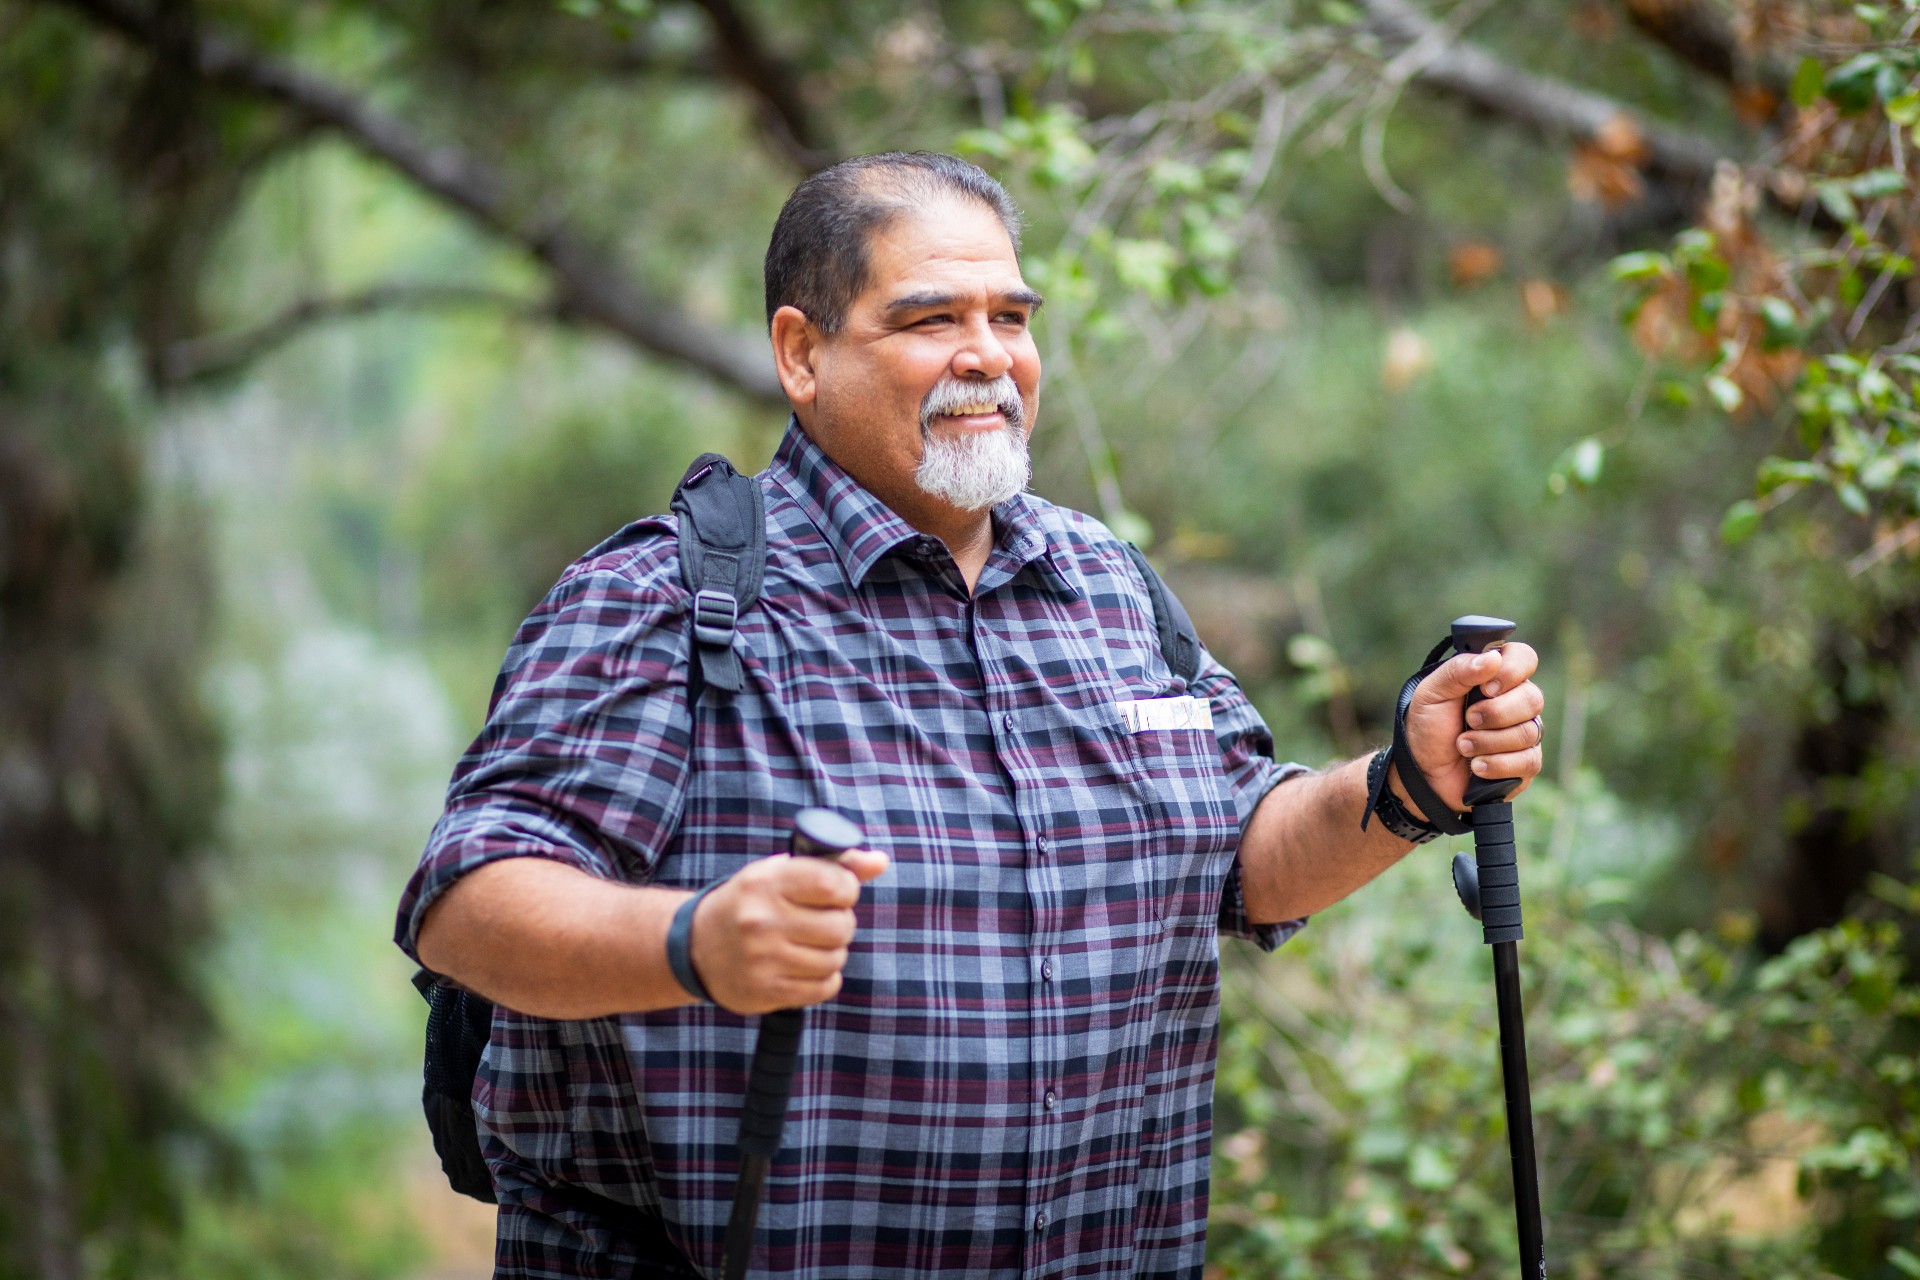 An overweight man with walking sticks hikes in nature.